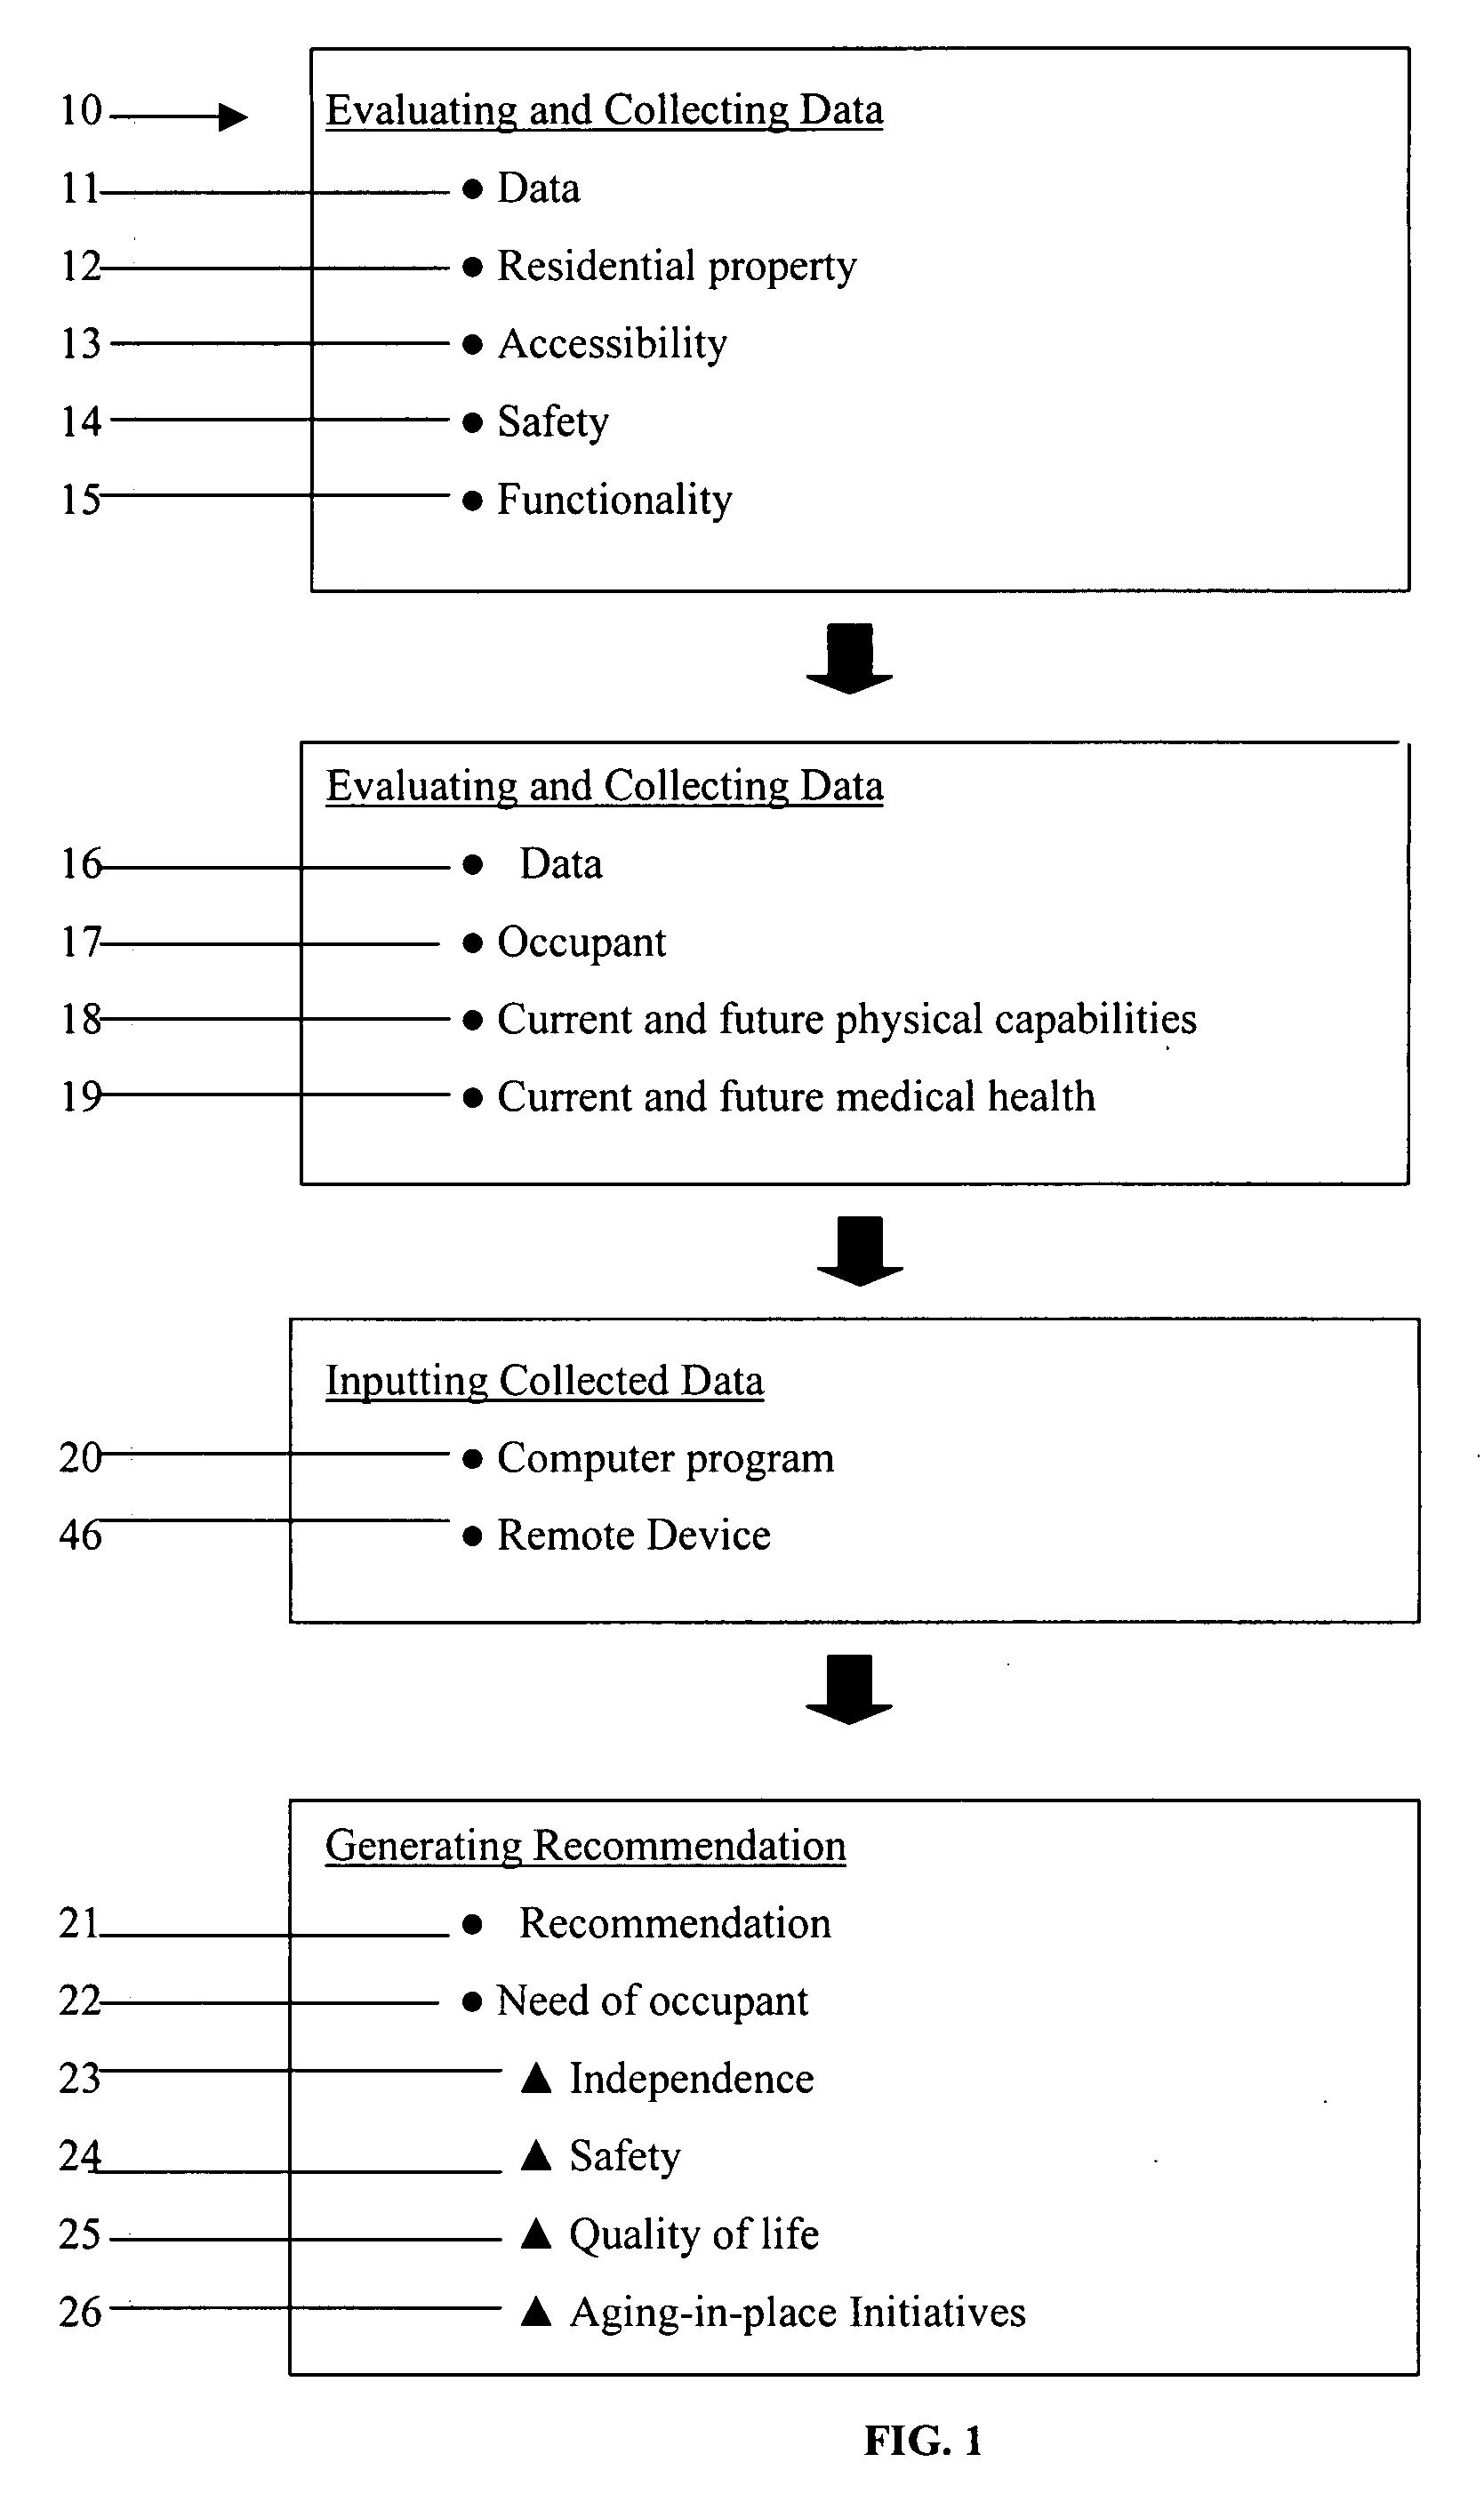 Computer-based method of recommending modifications to residential or commercial property